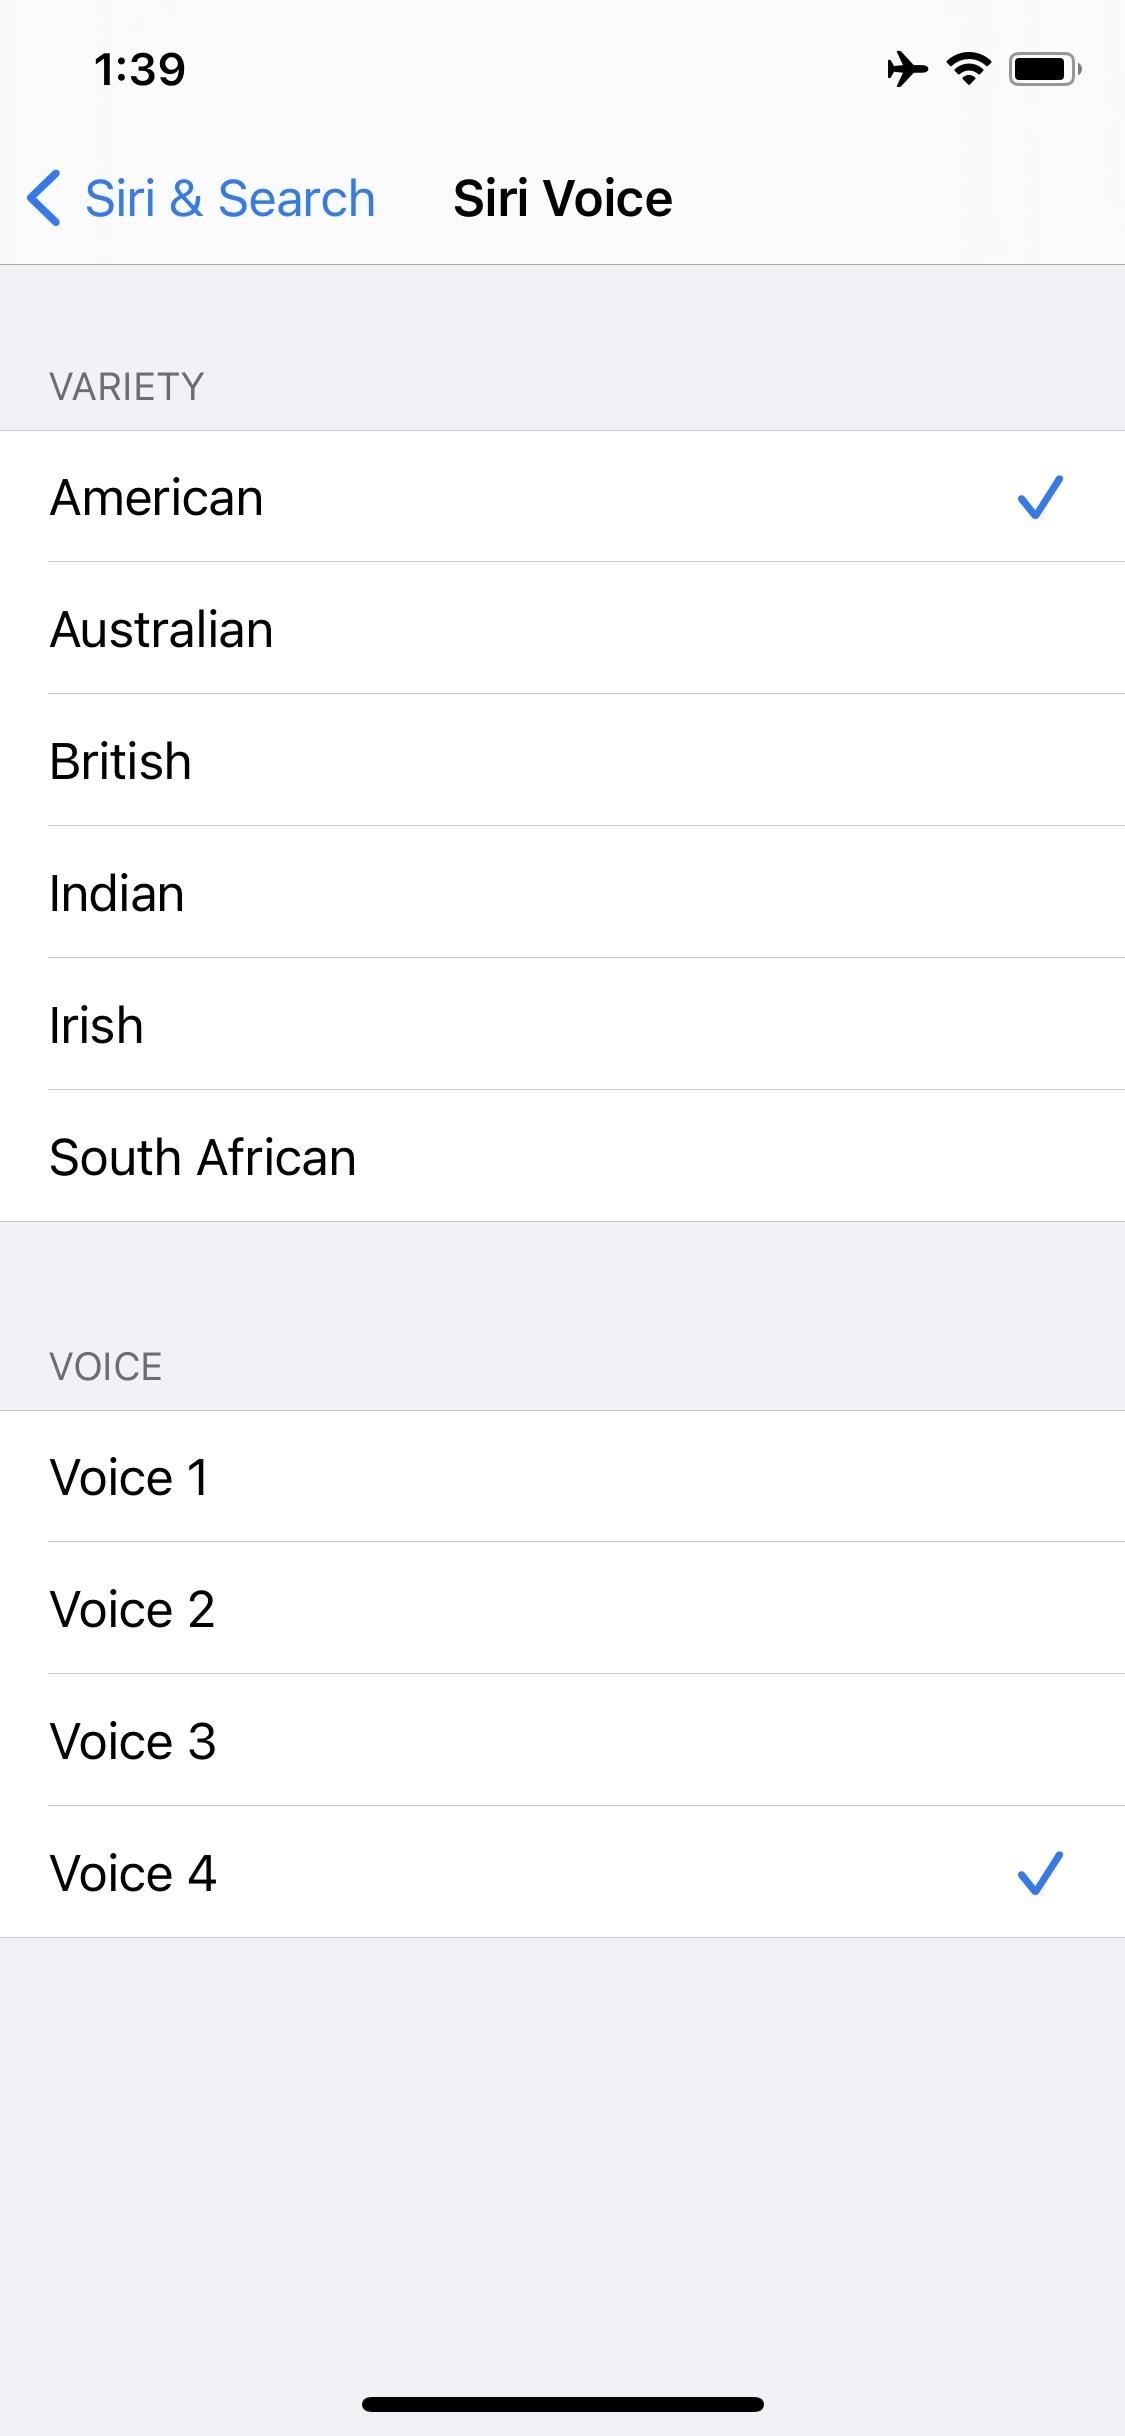 Apple Releases iOS 14.5 Public Beta 6, Features New Siri Voices & Battery Health Calibration for iPhone 11 Line